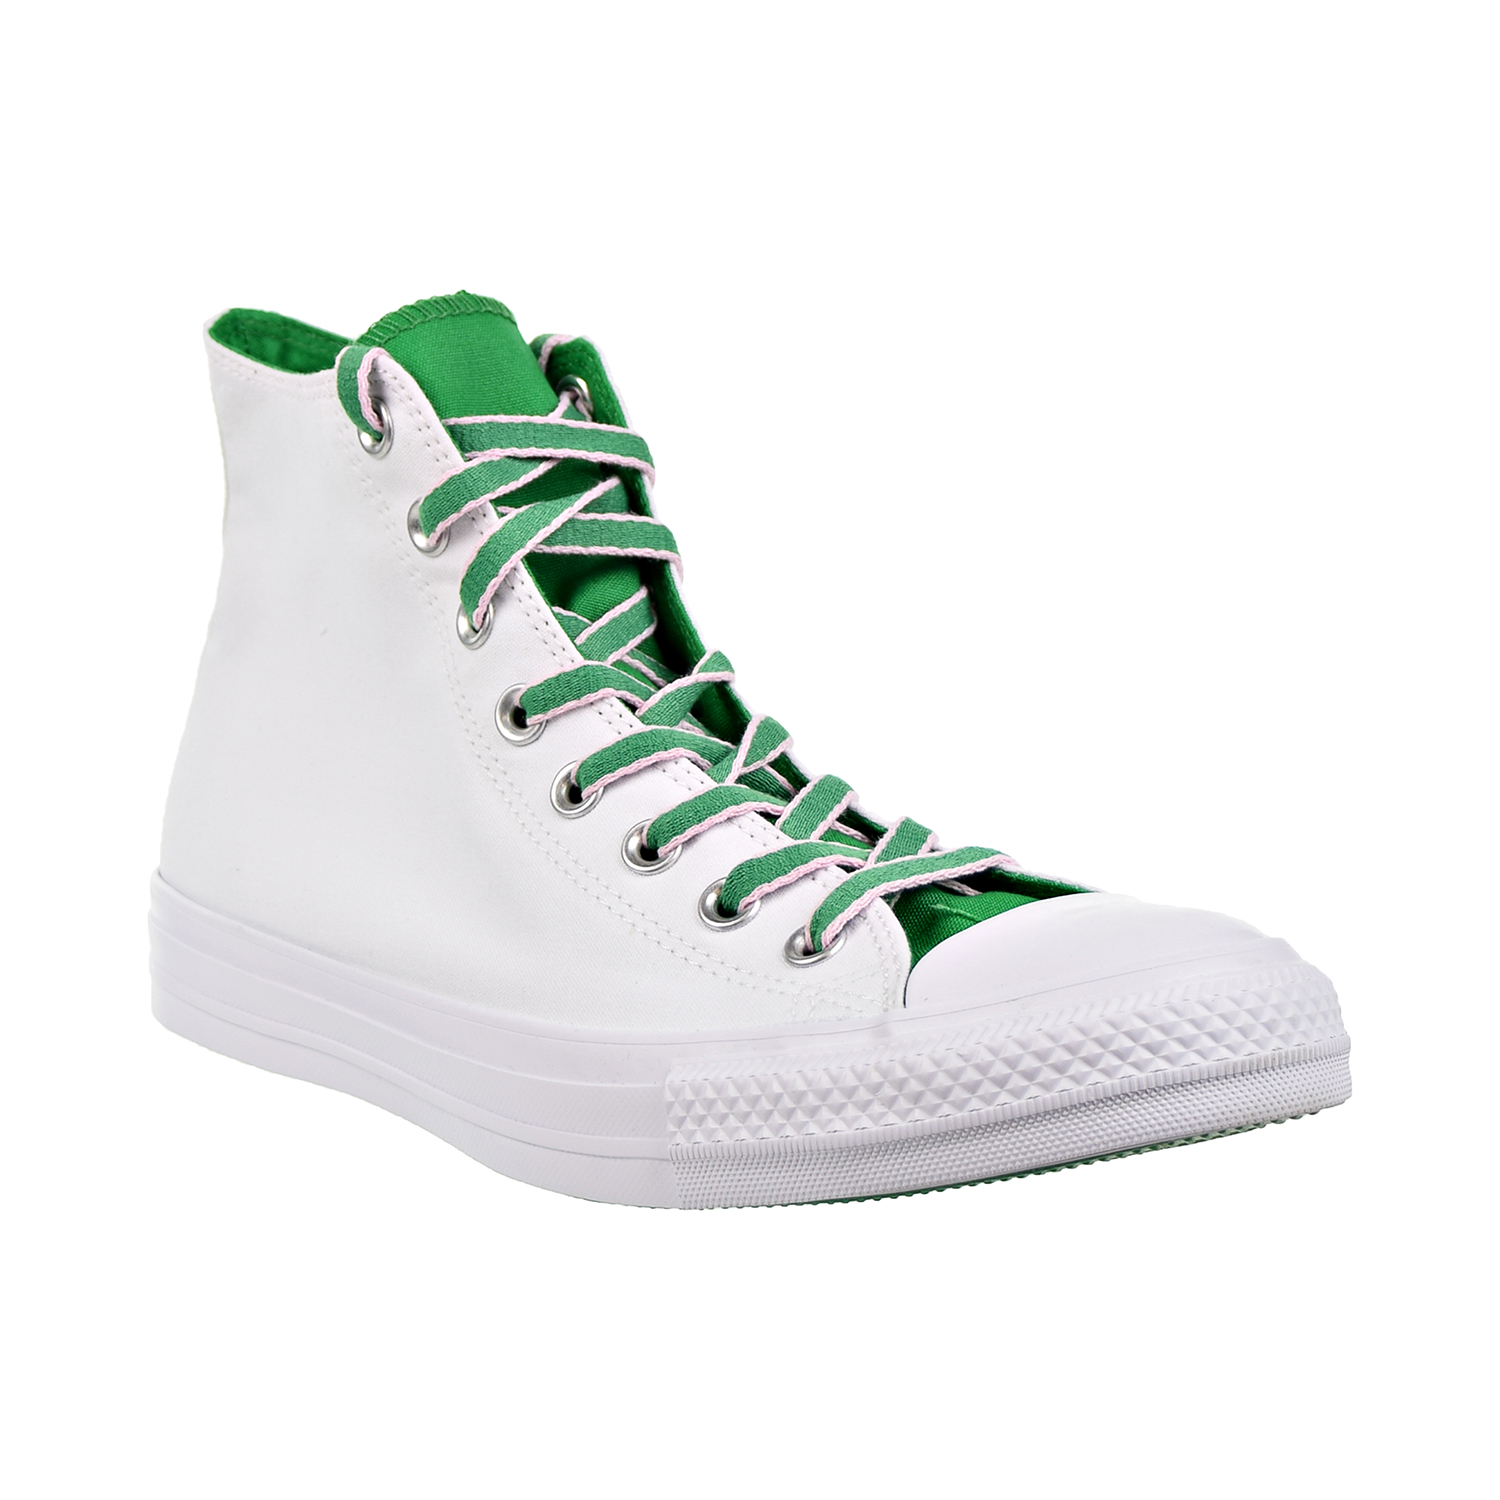 Converse Chuck Taylor All Star Hi Men's Shoes White/Green/Cherry Blossom 160465c (4.5 M US)